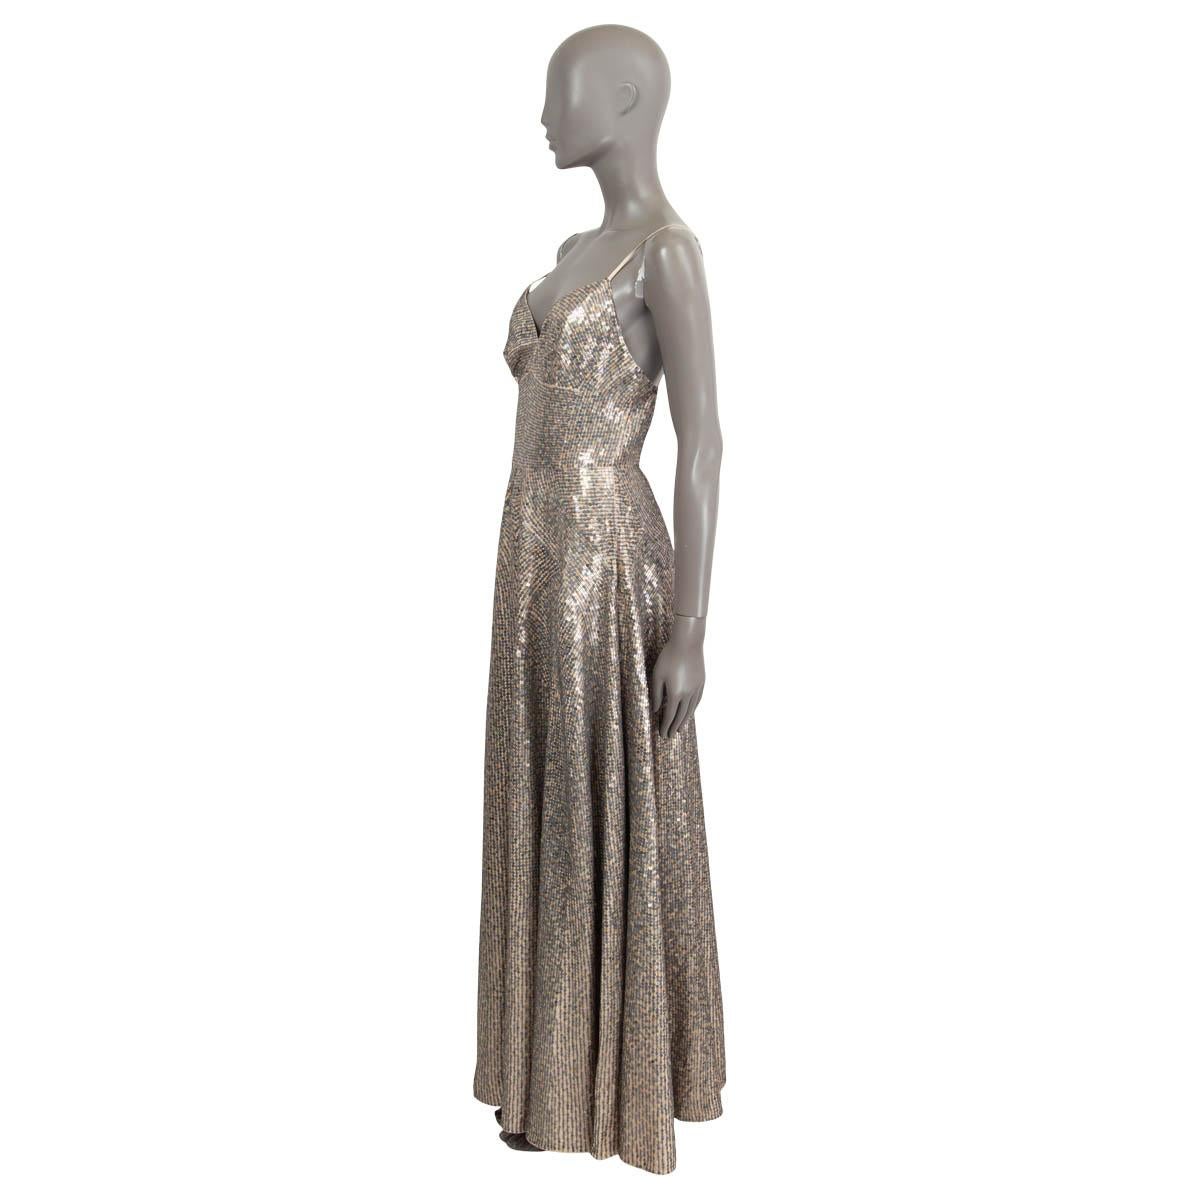 100% authentic Christian Dior 2018 Pre-Fall sleeveless flared grey and gold sequin embellished evening gown. The seuqins are sewn on nude silk (100%). The dress opens with a zipper on the back and is lined in nude silk (100%). Has been worn once and